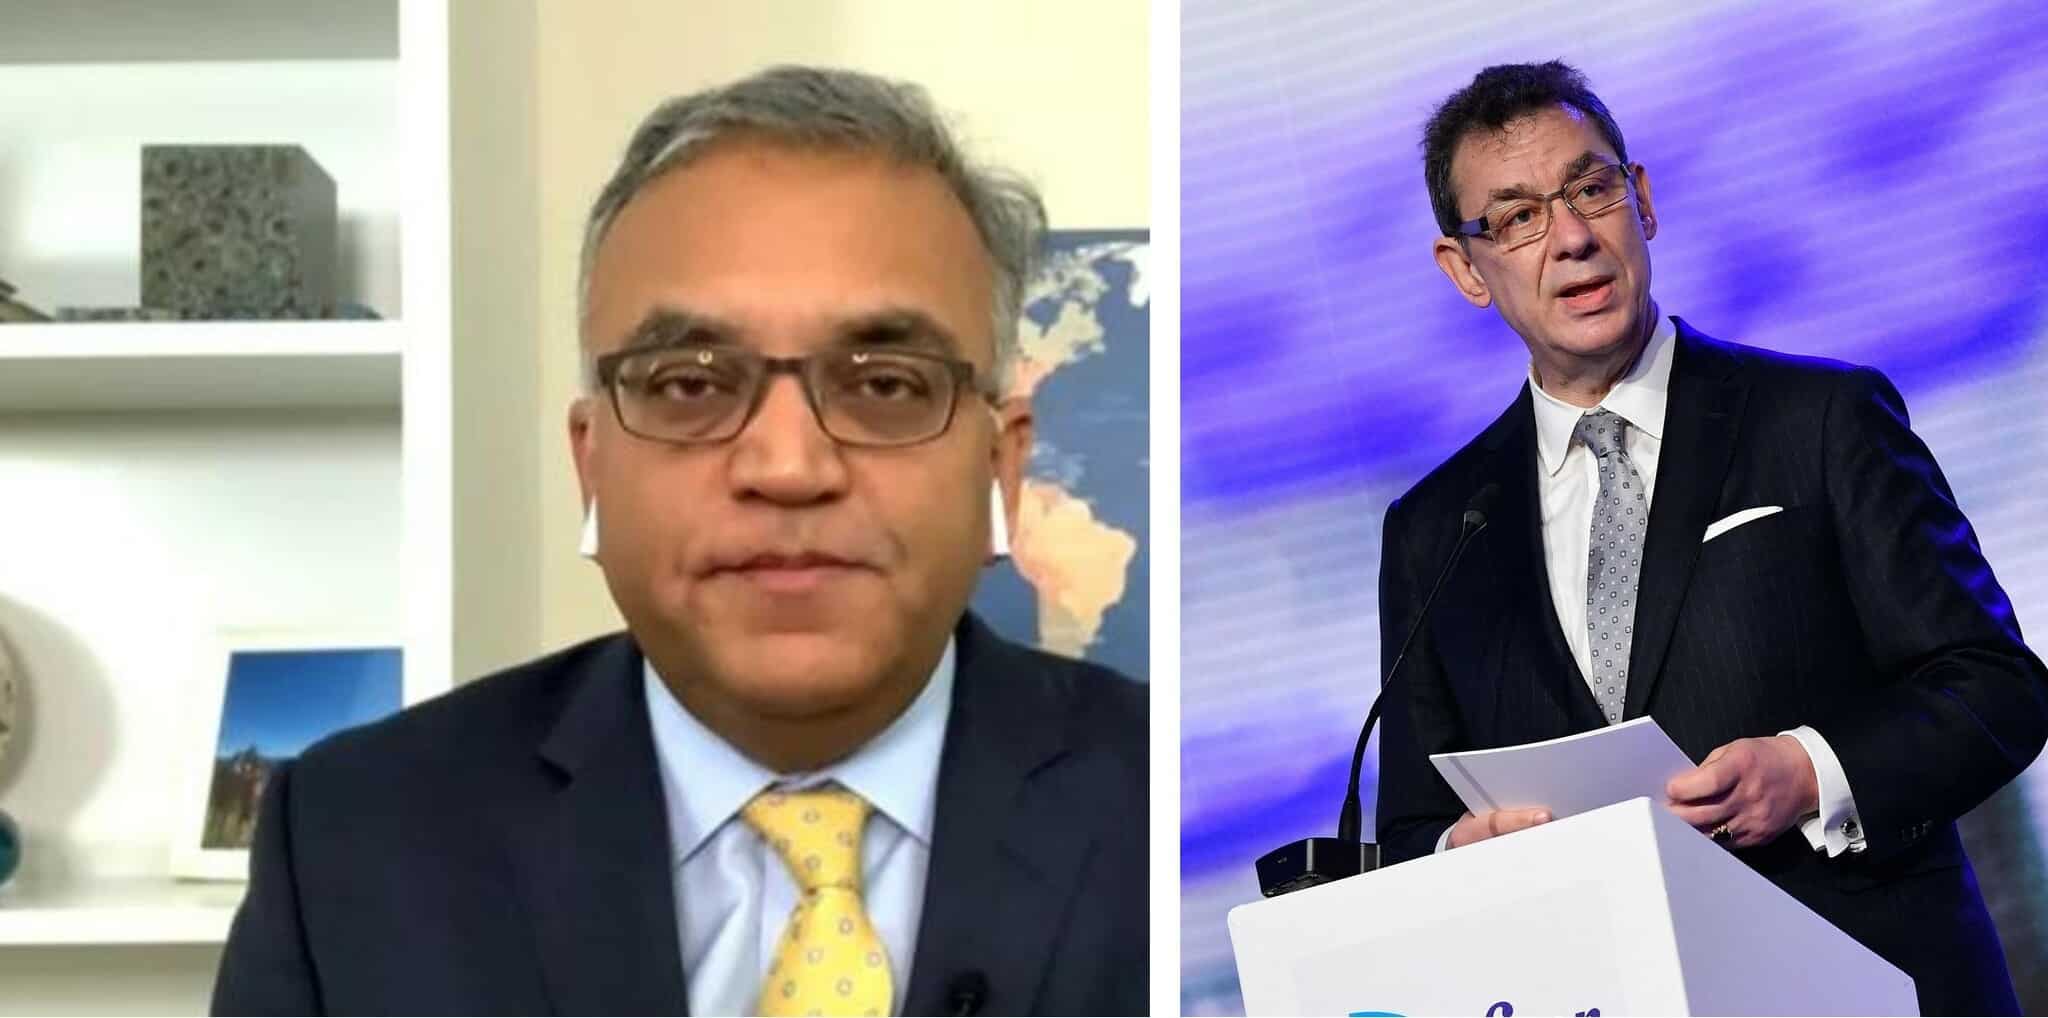 the new White House COVID-19 Response Coordinator is an Indian-American physician named Ashish Jha and of course Pfizer CEO Albert Bourla, who was born in the northern Greek city of Thessaloniki.